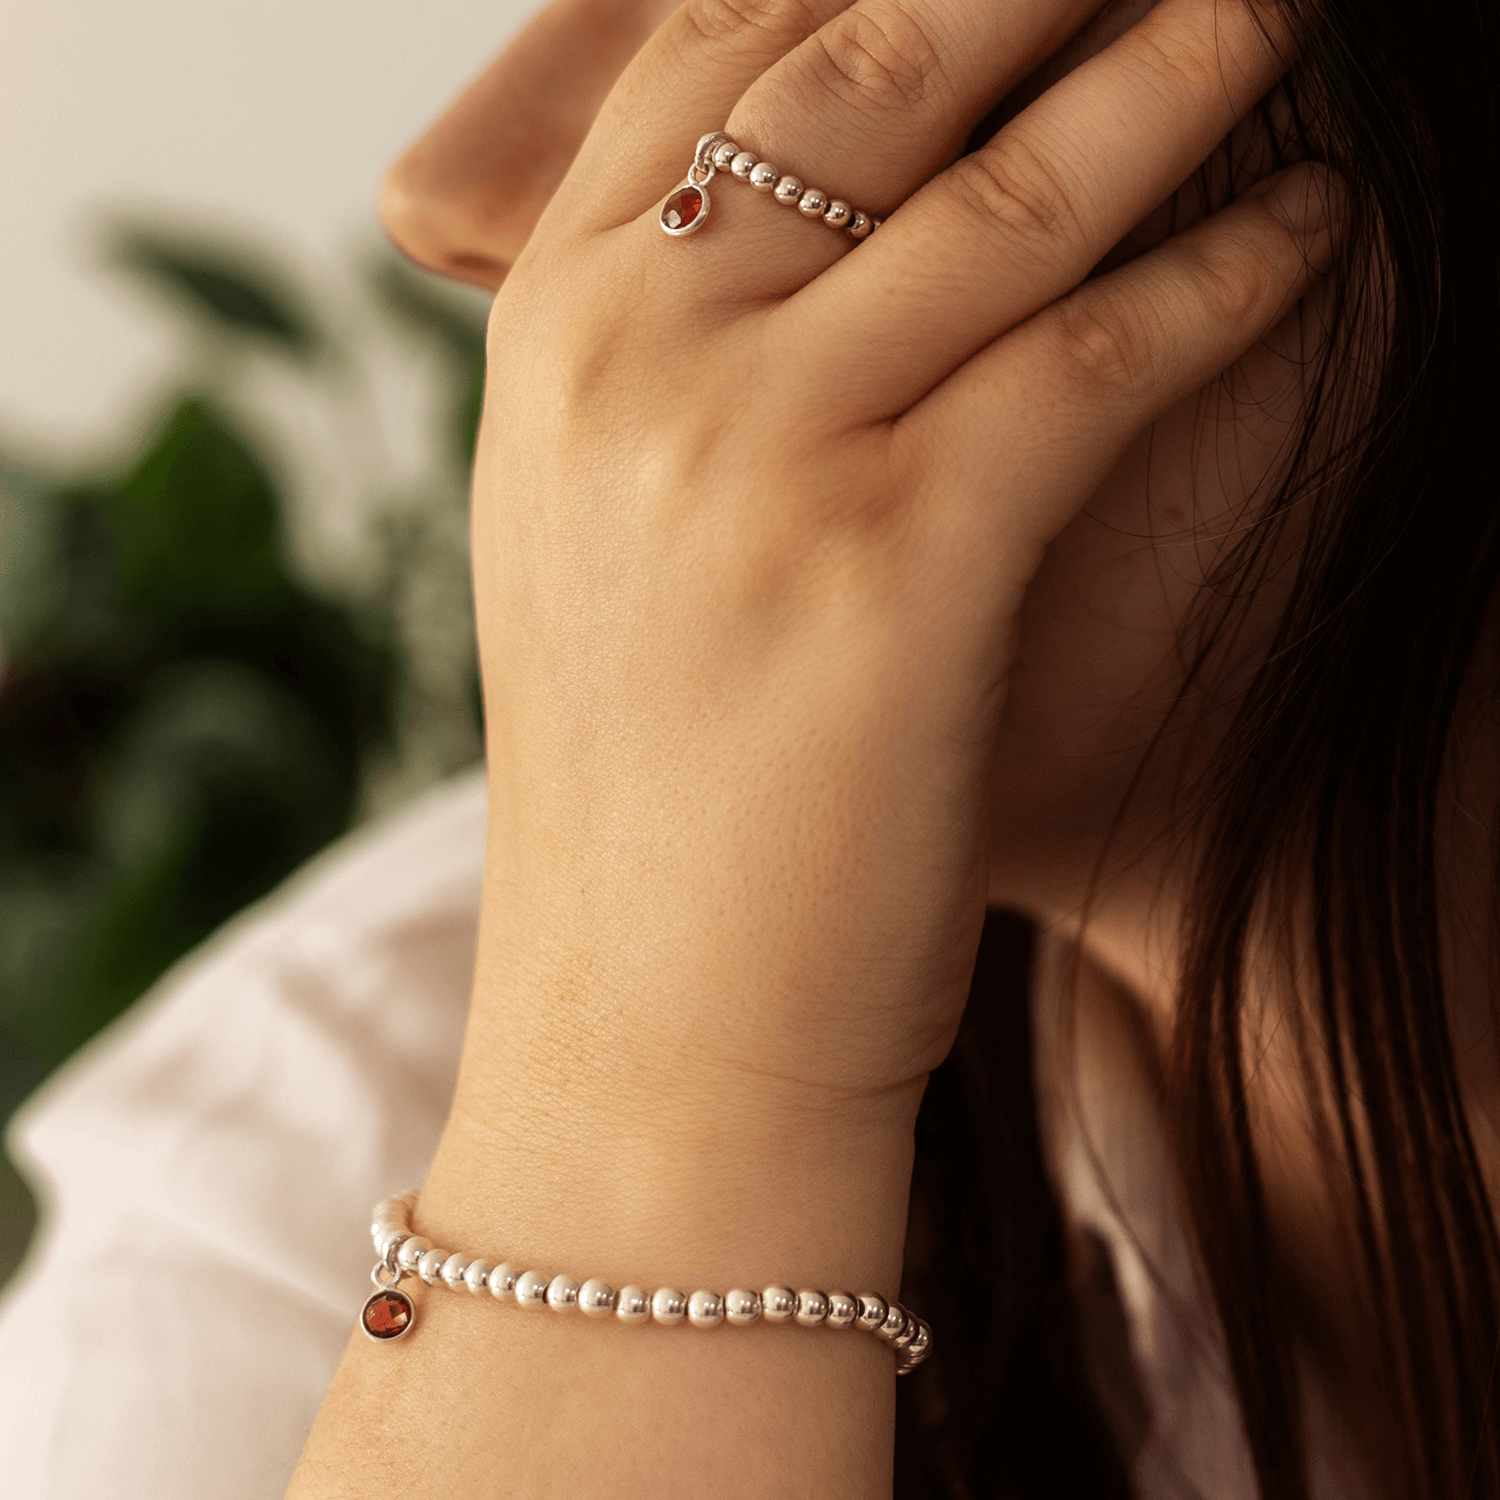  A person with long dark hair showcases a beaded bracelet and matching ring, each adorned with a small red garnet birthstone. Their hand is gently placed near their face, and the background is blurred with green foliage